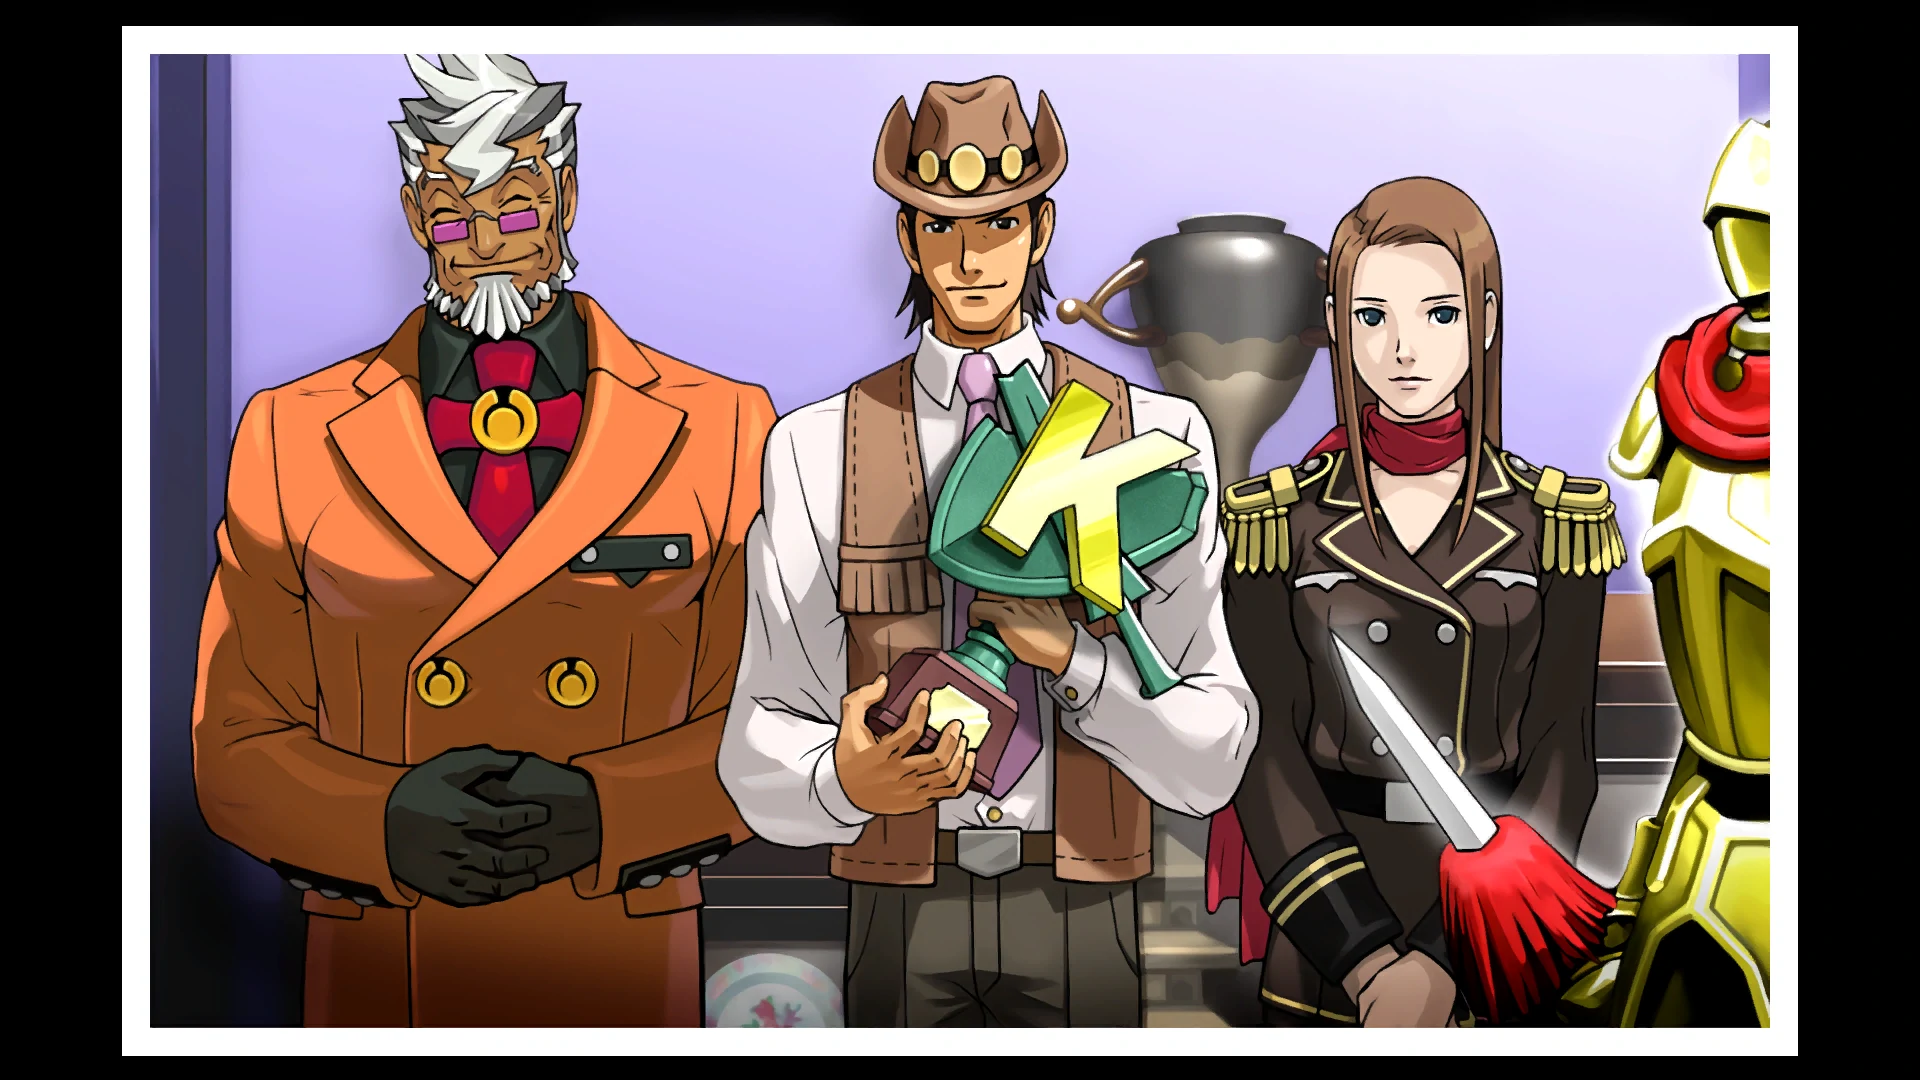 Источник: https://aceattorney.fandom.com/wiki/Rise_from_the_Ashes